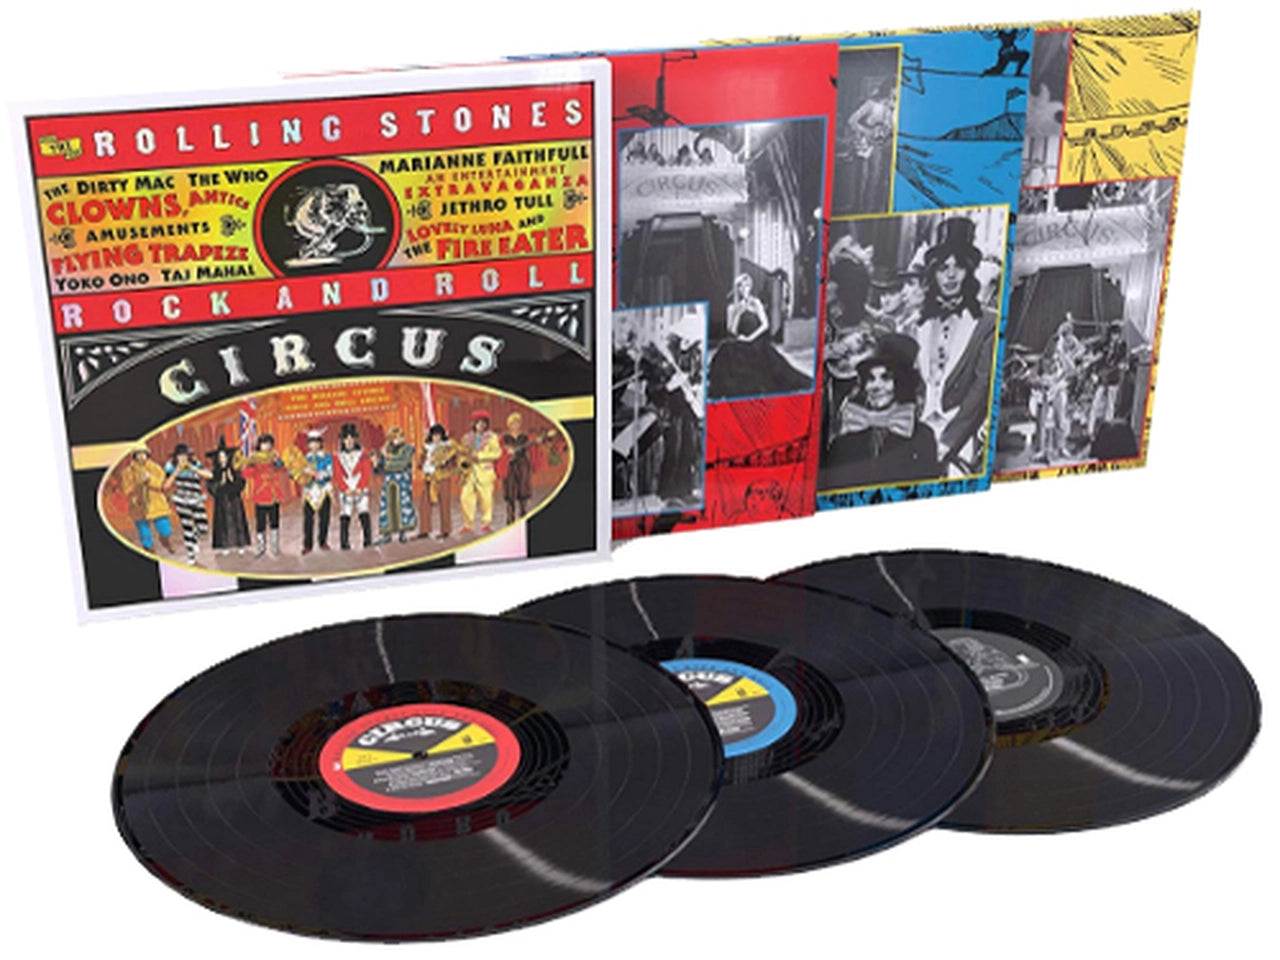 Rolling Stones, The - The Rolling Stones Rock And Roll Circus [3LP] (180 Gram, remastered, limited)